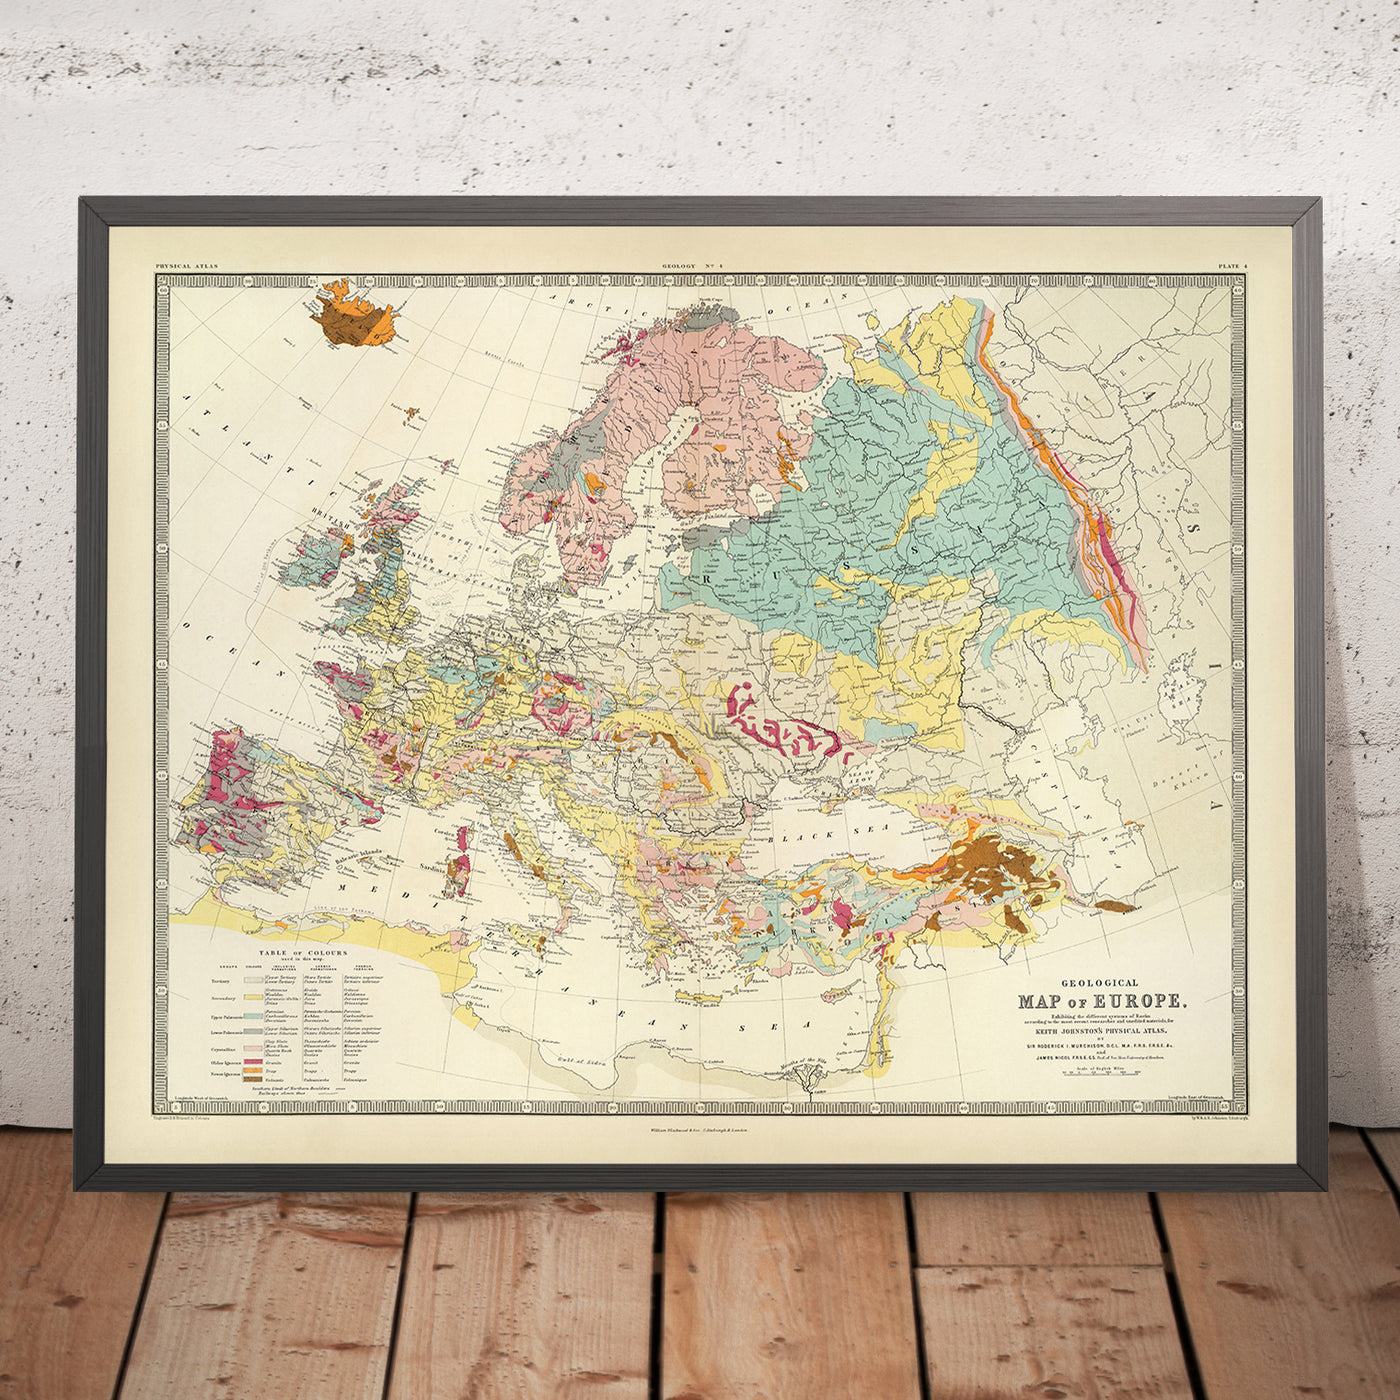 Old Geological Map of Europe by AK Johnston, 1856: Geological Chart of Mountains, Rocks, Strata